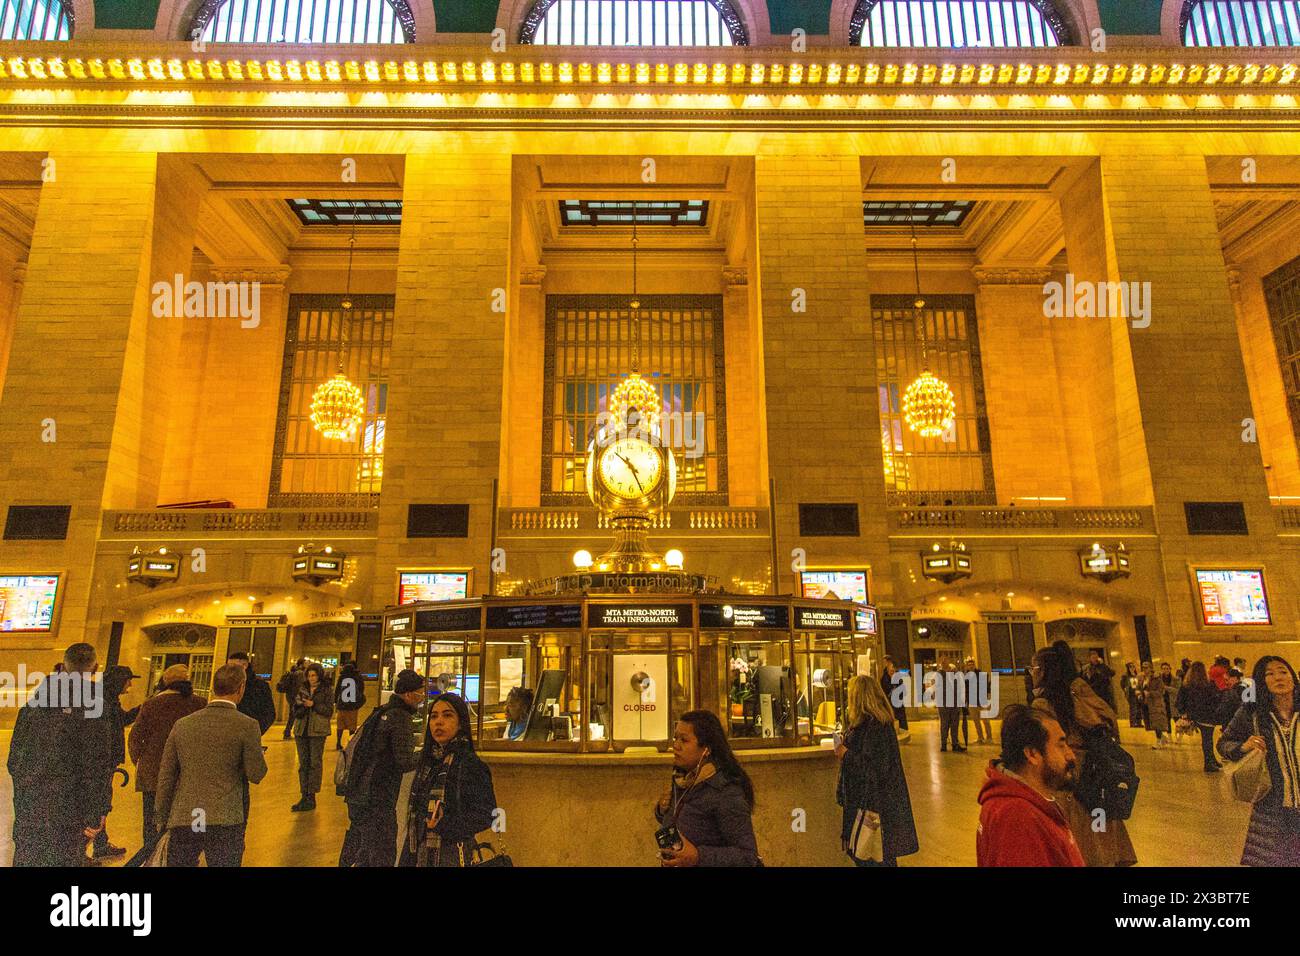 The famous four-sided opal clock of the information centre in the main hall of Grand Central Station, New York's main train station, Midtown Stock Photo